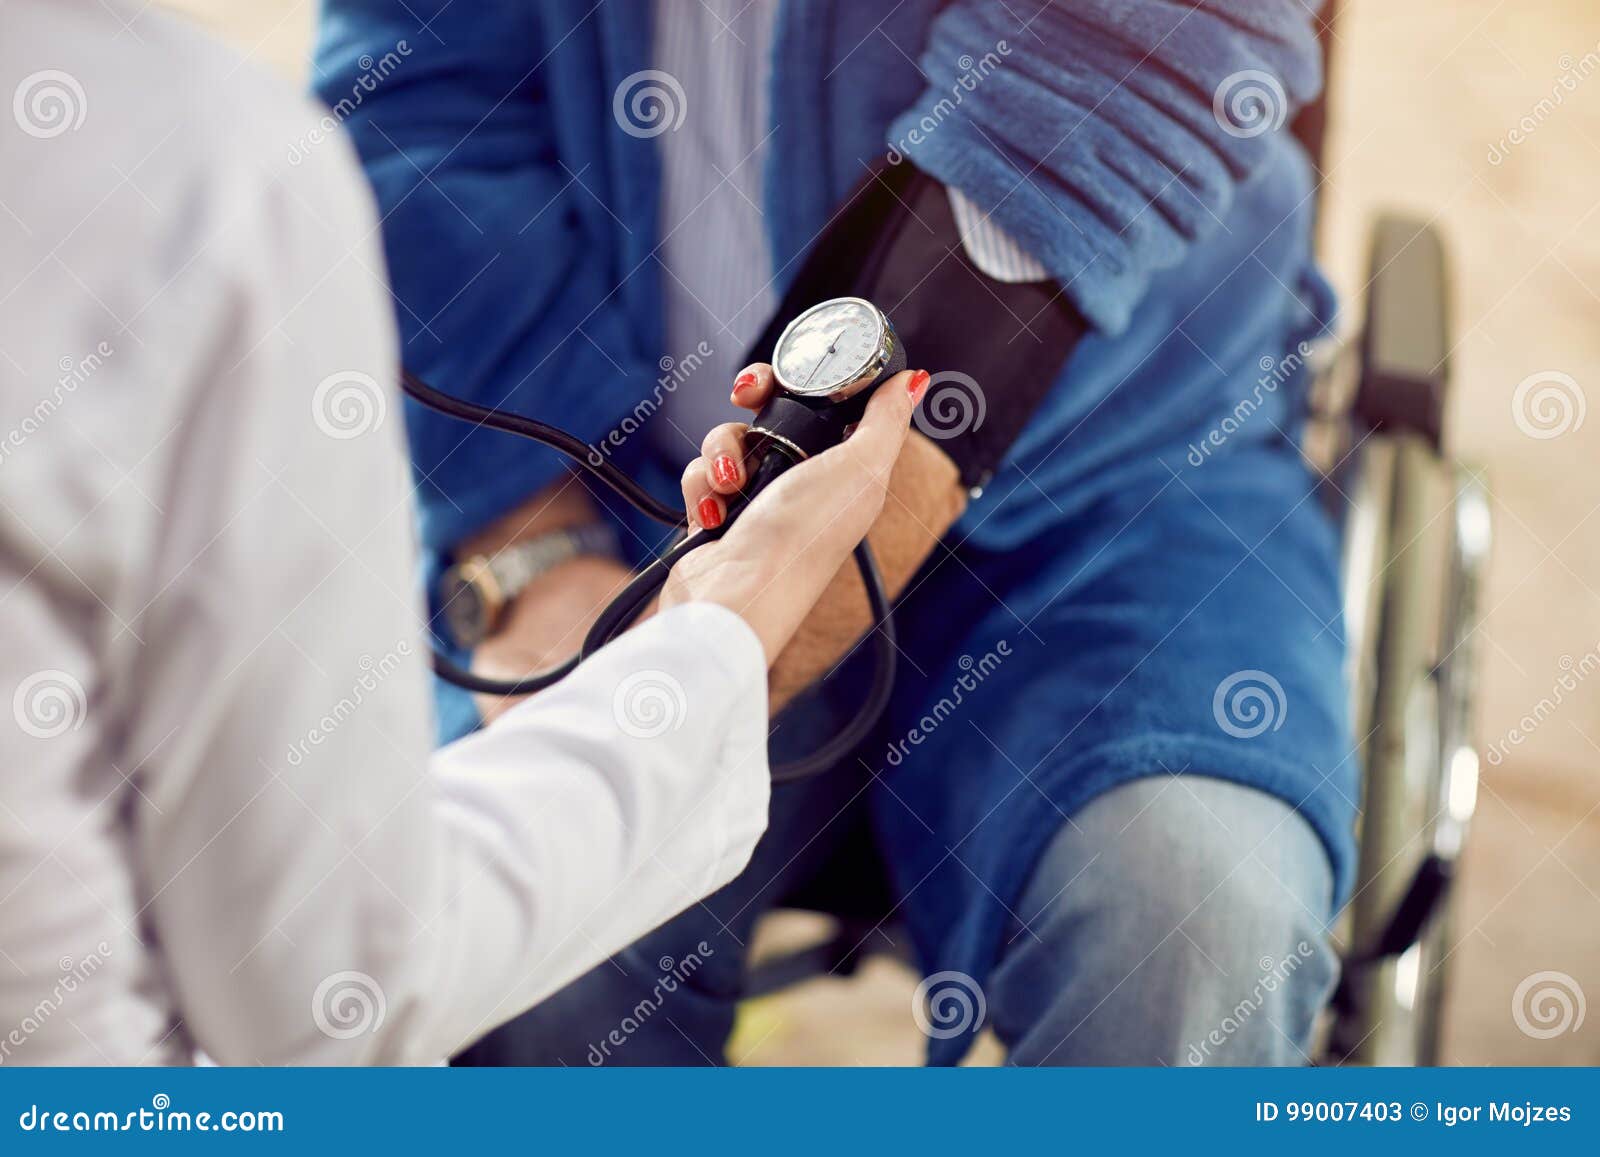 close up checking the hypertension assessment of blood pressure